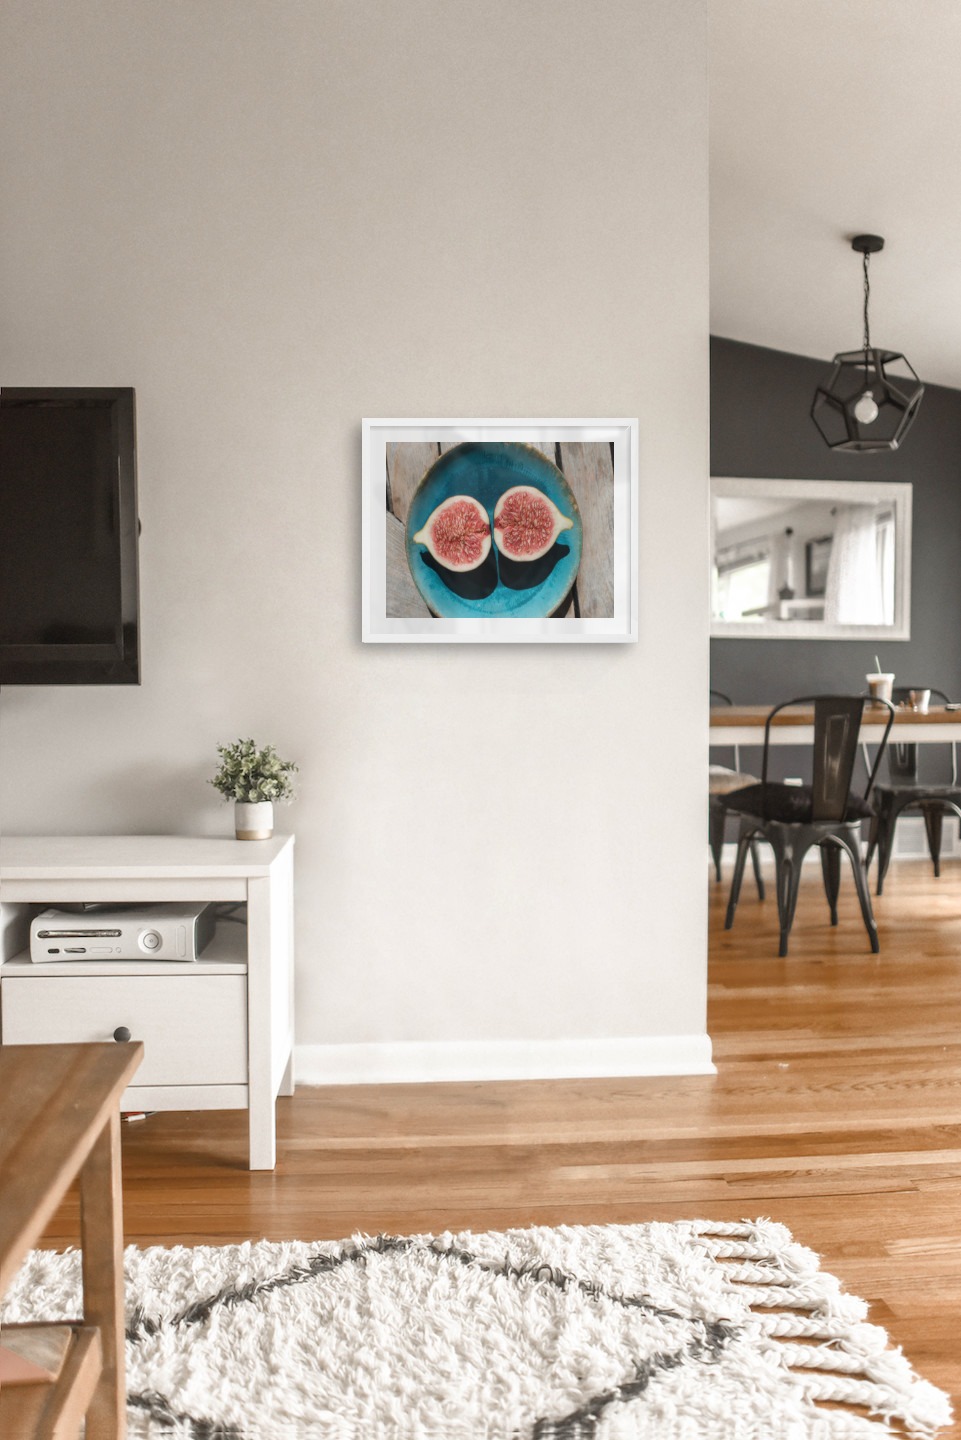 Gallery wall with picture frame in white in size 40x50 with print "Opened fruit"